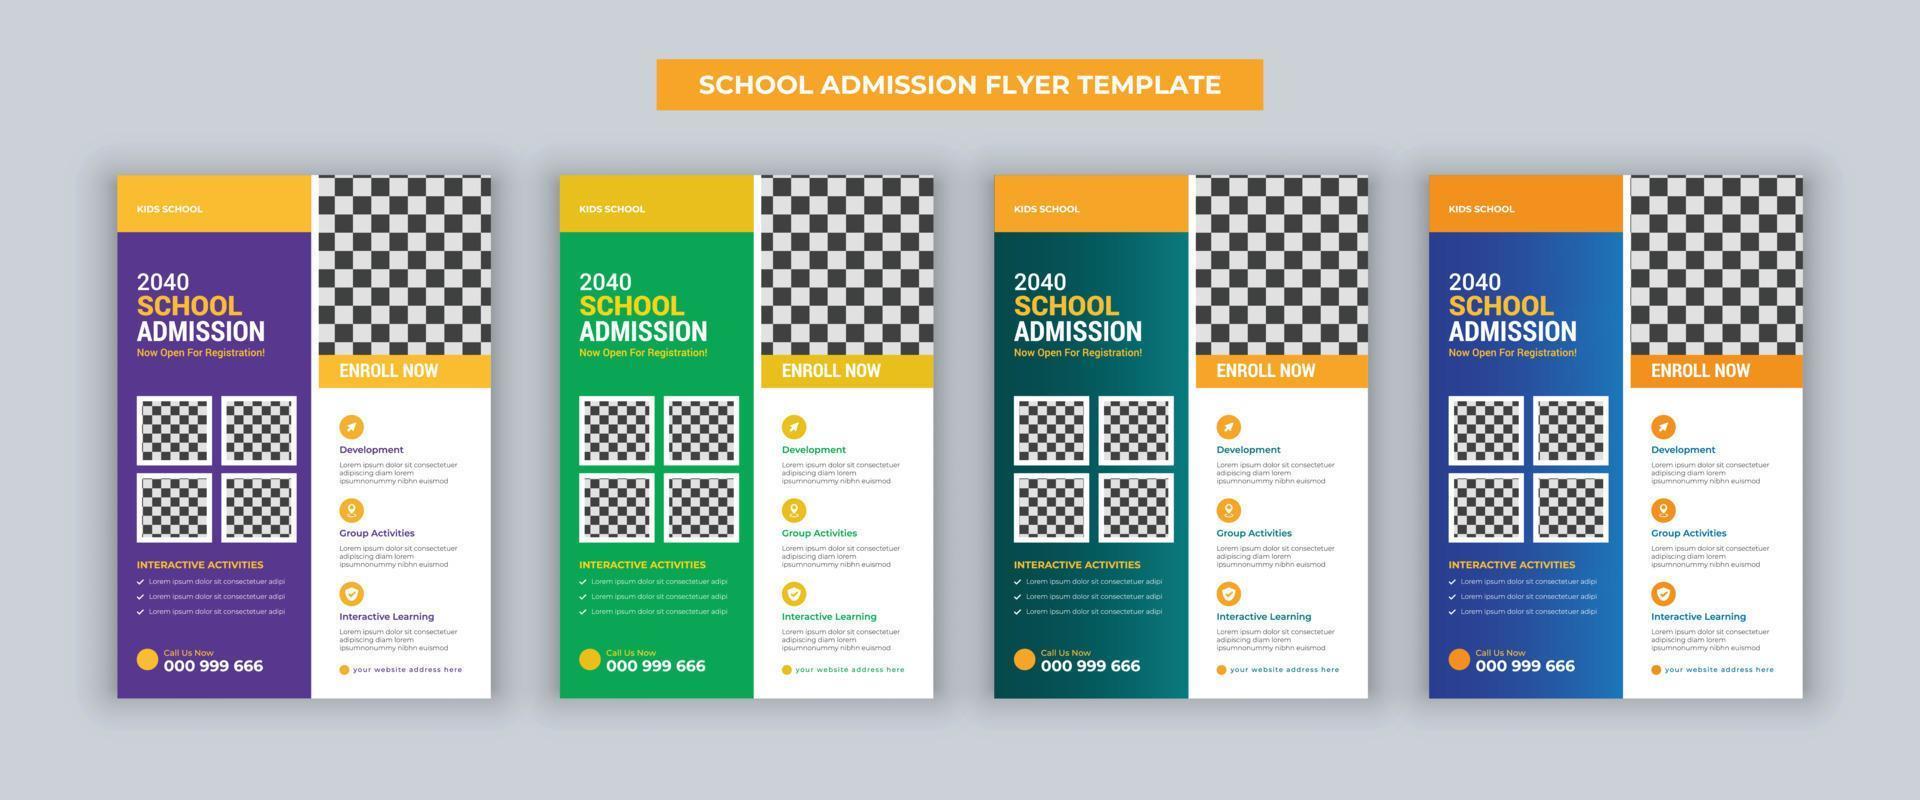 School education admission flyer or poster design template and online school education admission kids flyer template. vector